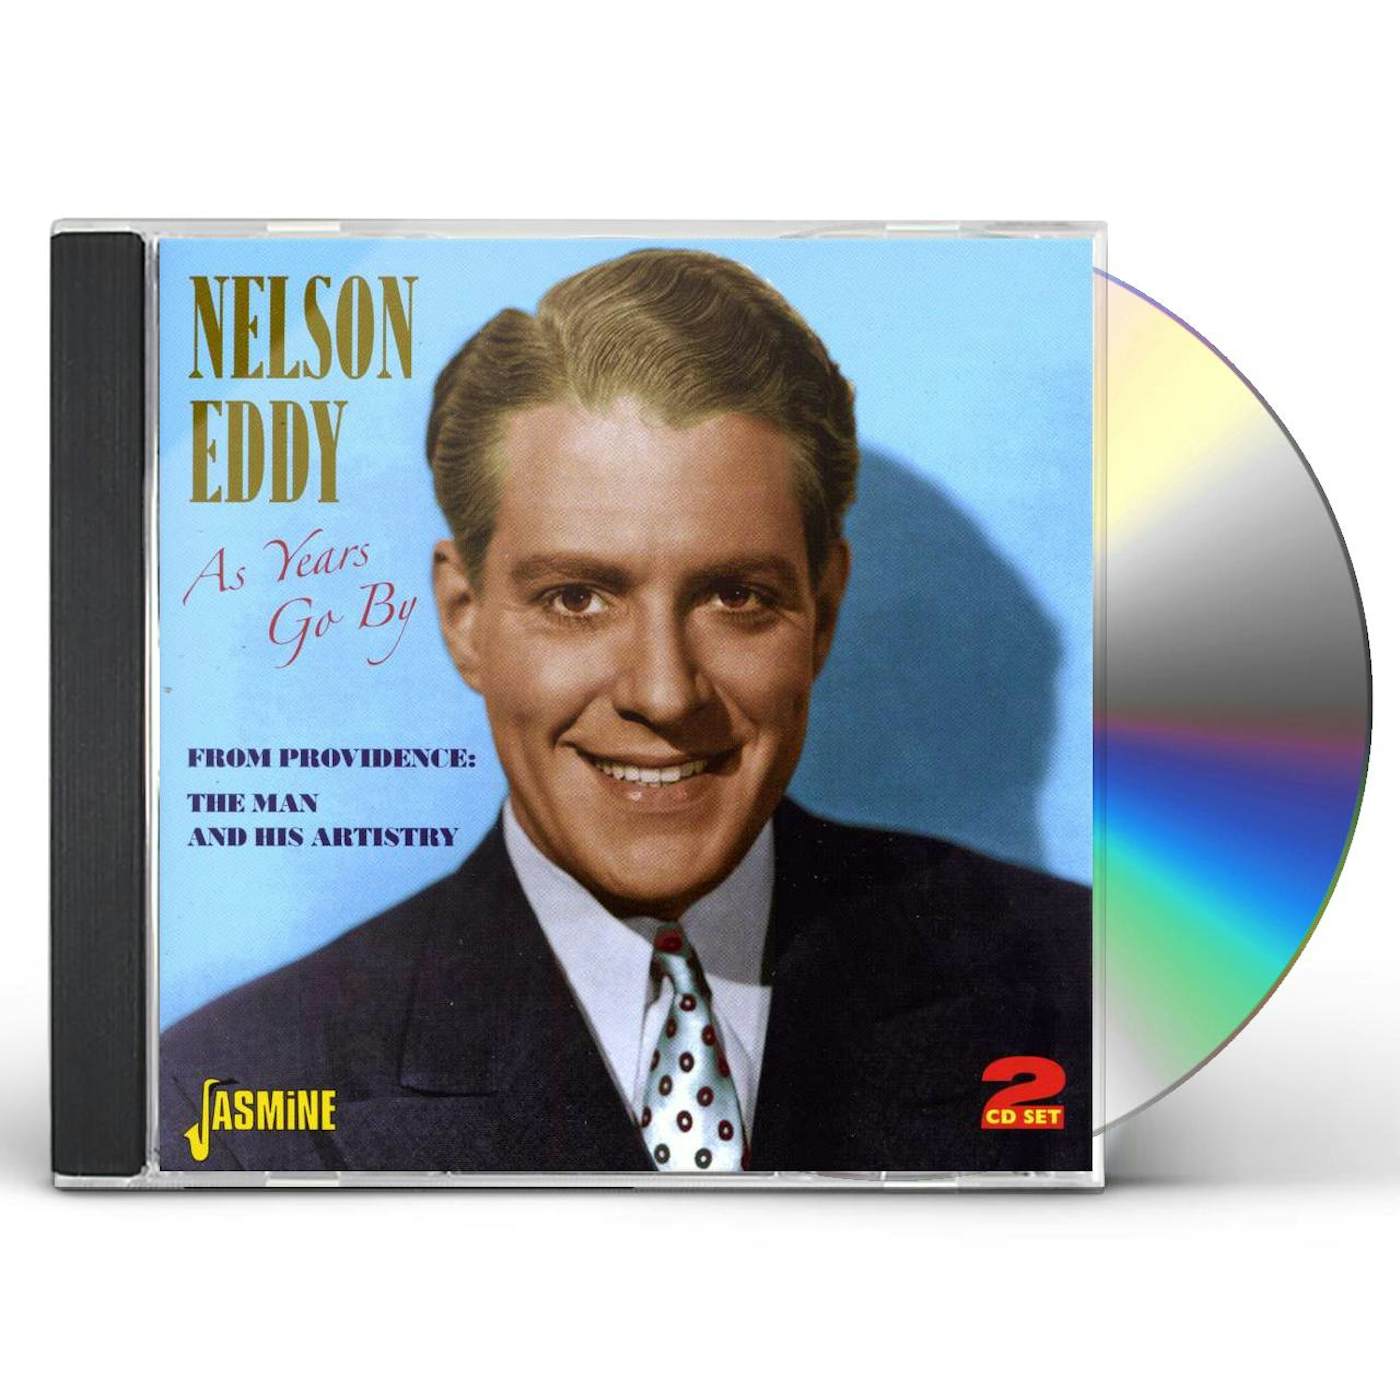 Nelson Eddy AS YEARS GO BY CD